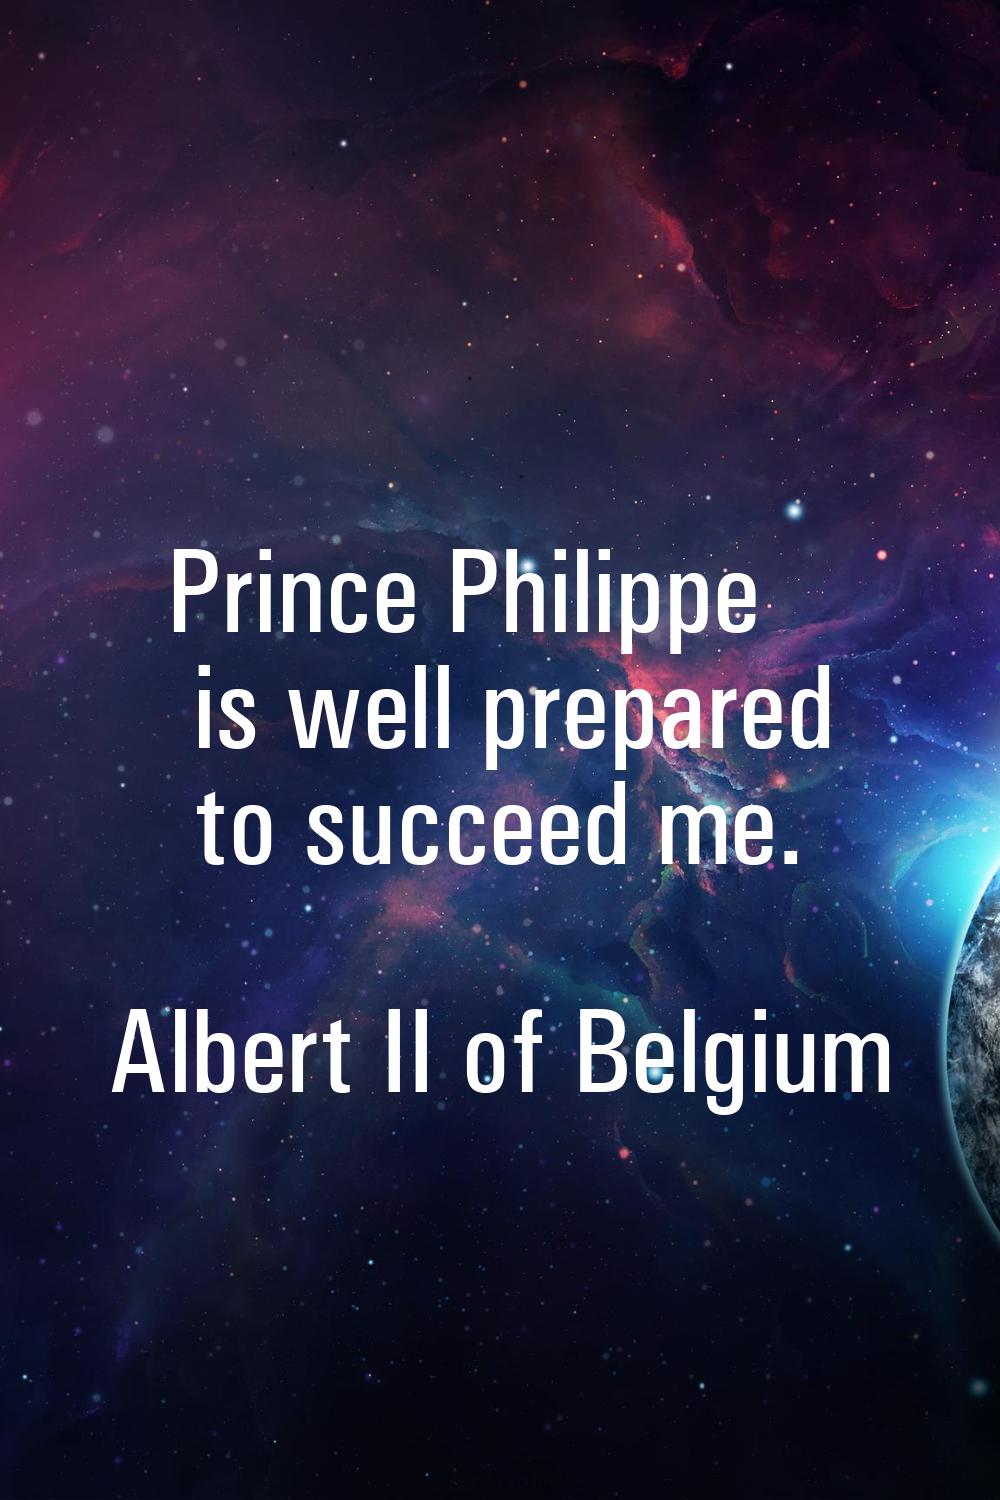 Prince Philippe is well prepared to succeed me.